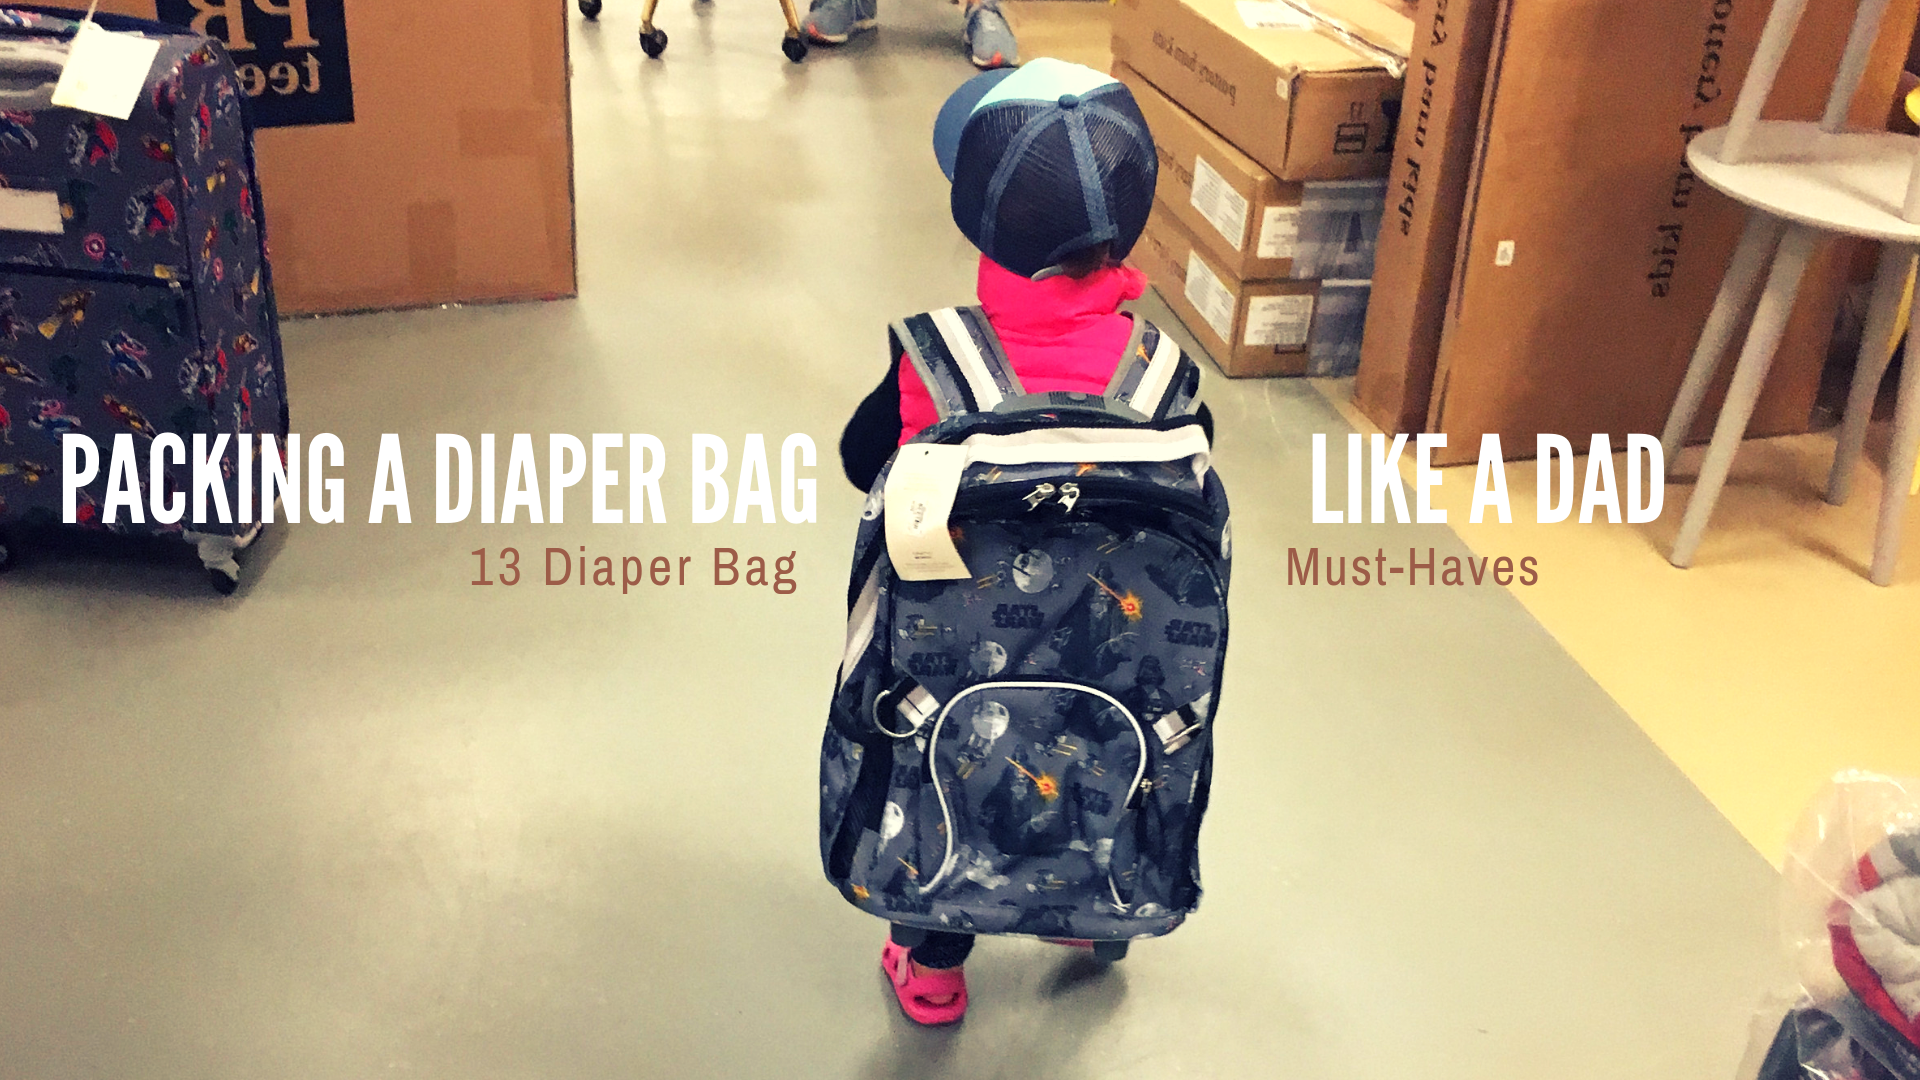 Packing a diaper bag like a dad: 13 Diaper Bag Must-Haves